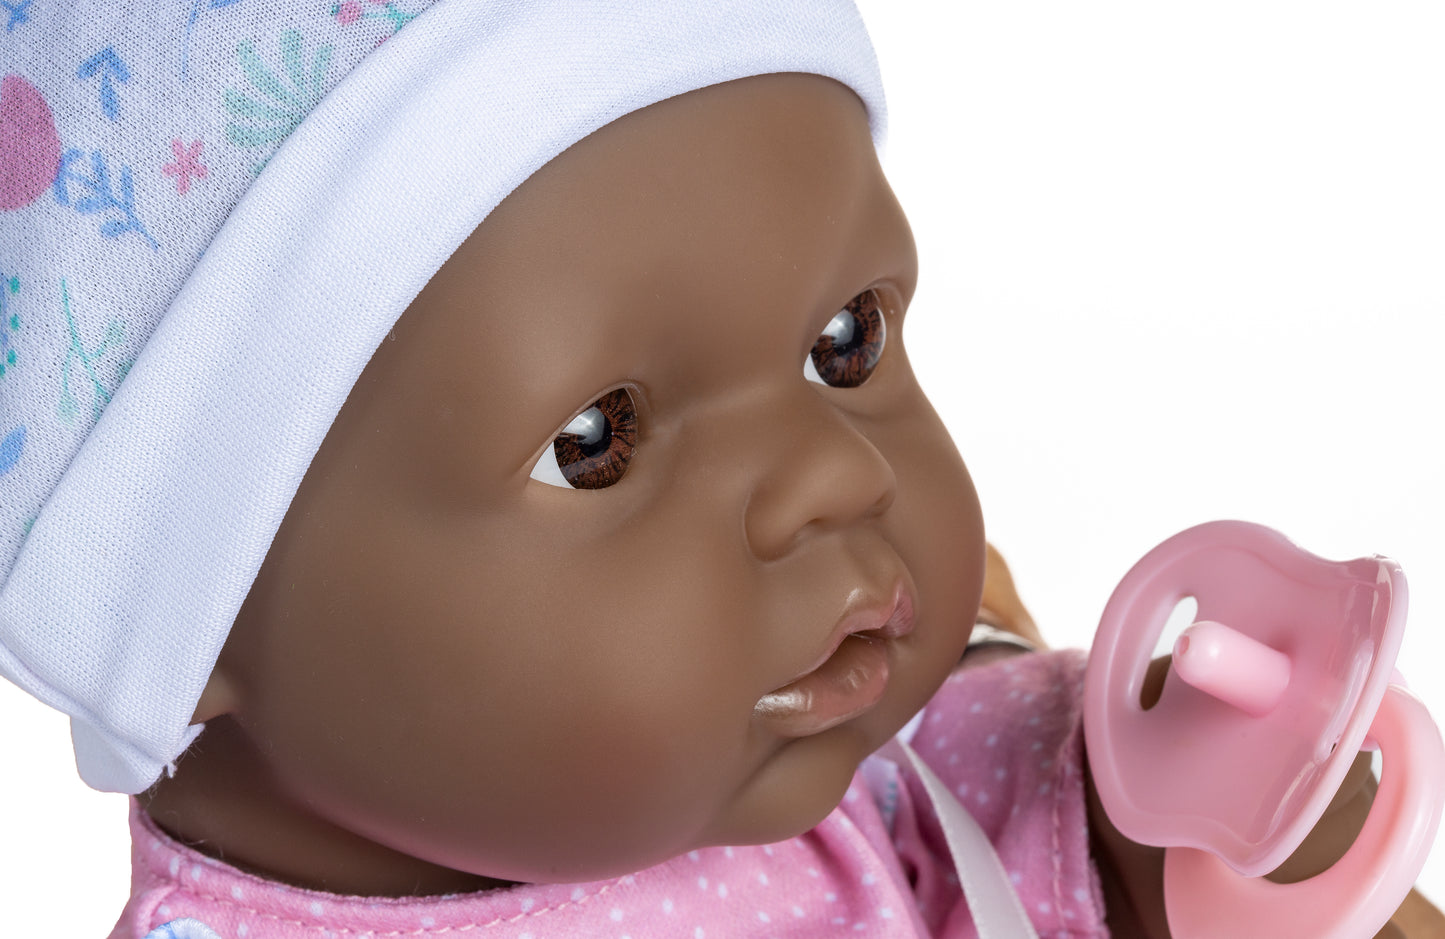 La Baby ® 16" Soft Body Baby Doll Pink/White 3 Piece Outfit w/ Pacifier & Magic Bottle. African American.